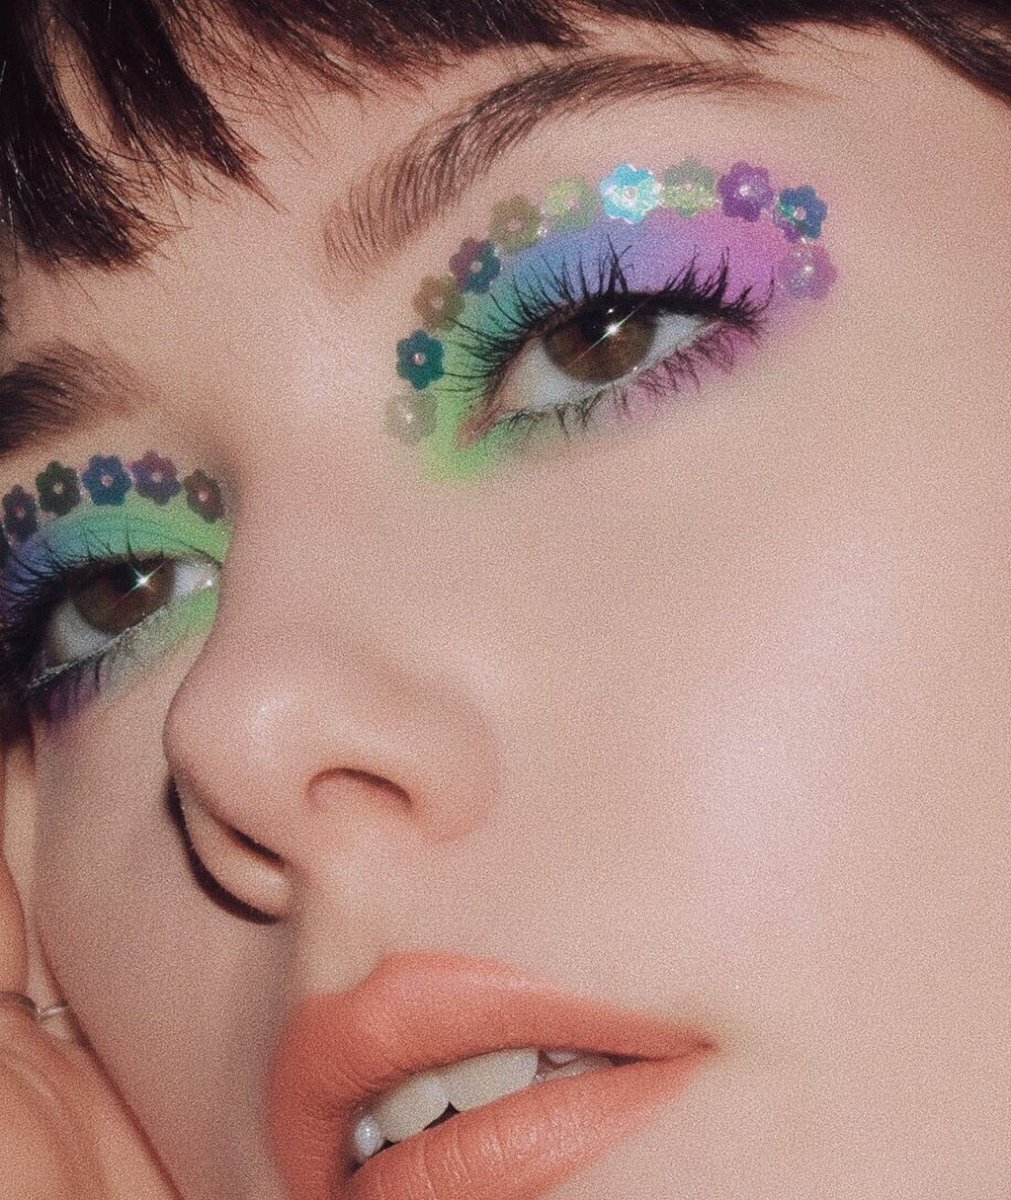 😍 @tatianaroseart created this dreamy look with Twitch, Cheat Code, 8-Bit and Player One from our Fun Size palette 🎨 #sugarpill #vegan
She also used @marcjacobsbeauty Velvet Noir mascara and @Doseofcolors Sweet n Sassy Liquid Lip 💕